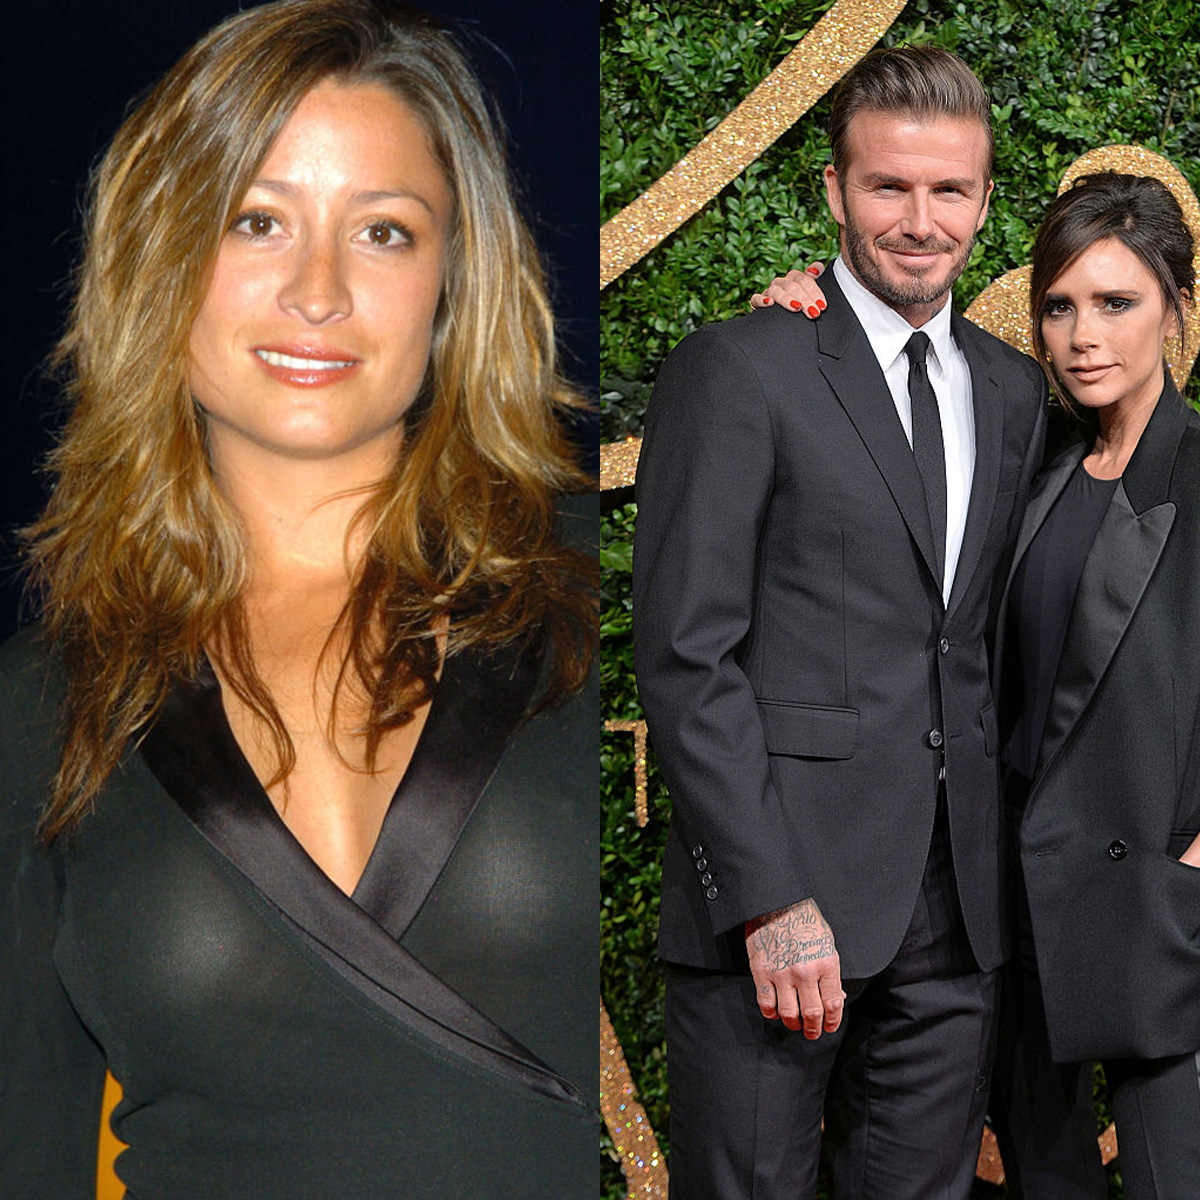 Rebecca Loos Reacts to Commentary Amid Resurfaced David Beckham Claims